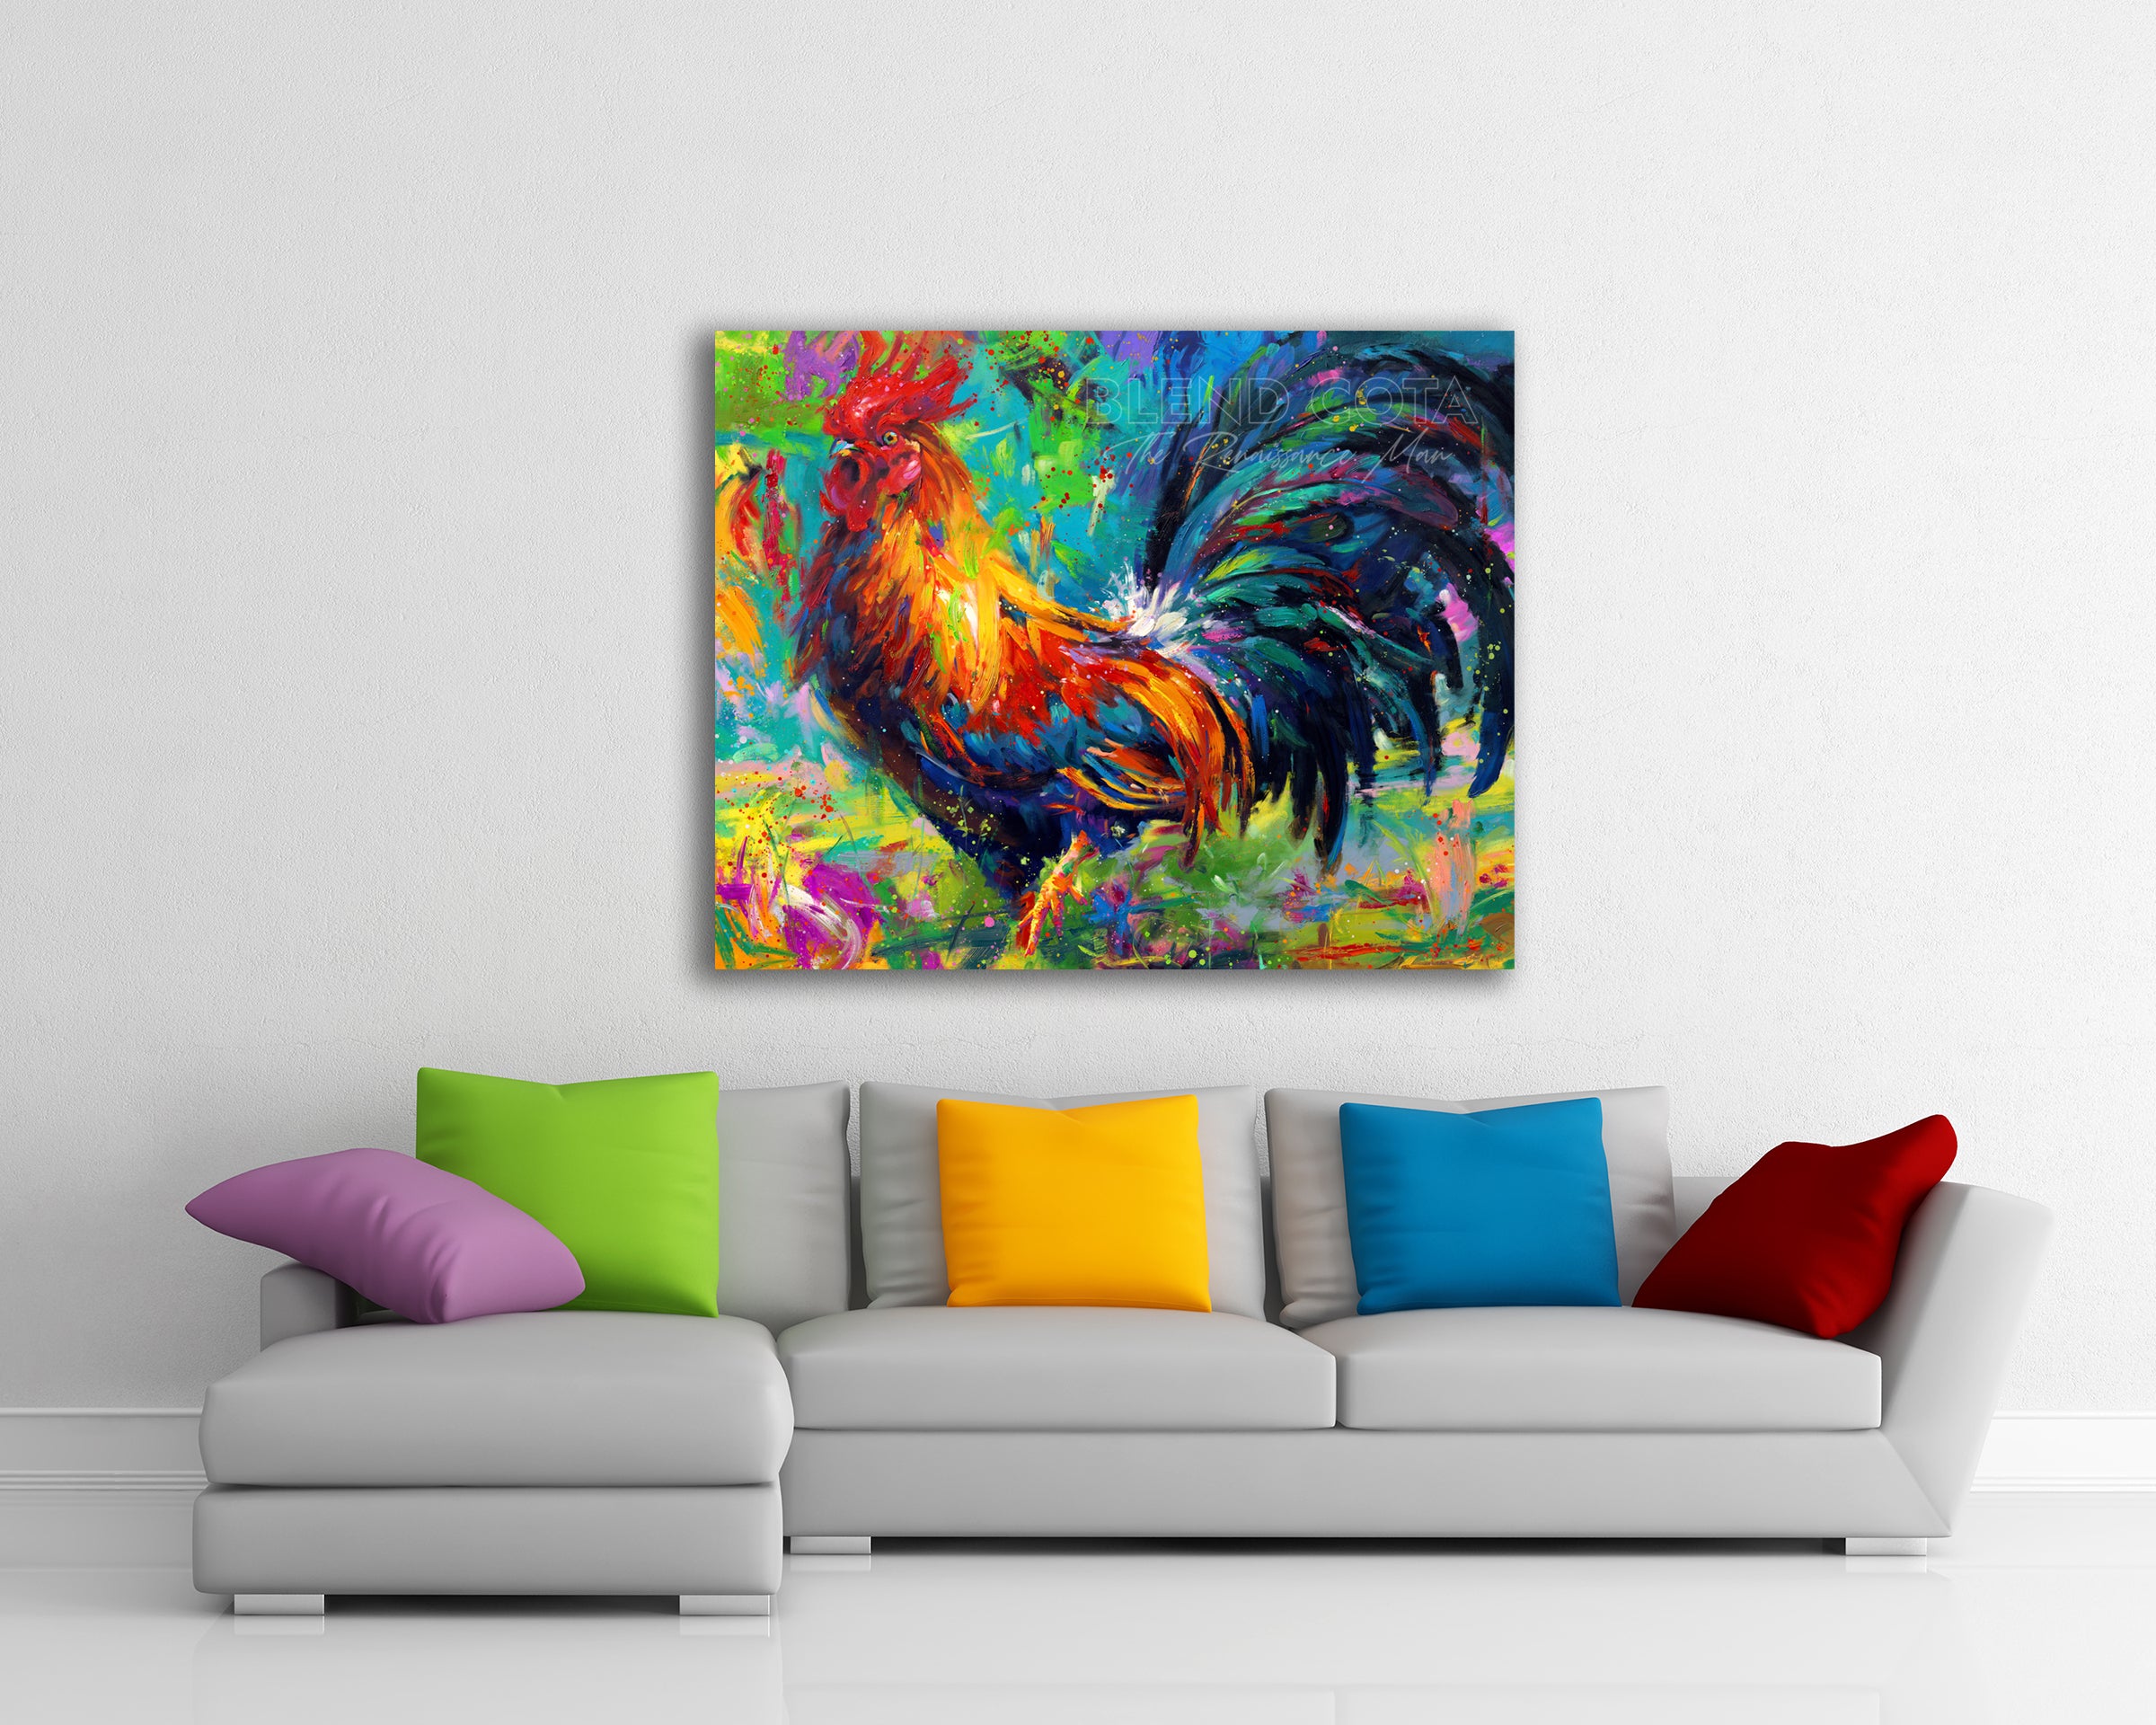 Oil on canvas original painting of red, yellow and blue rooster on a turquoise background, the French national symbol and farm to kitchen bird in colorful brushstrokes, color expressionism style in a room setting.